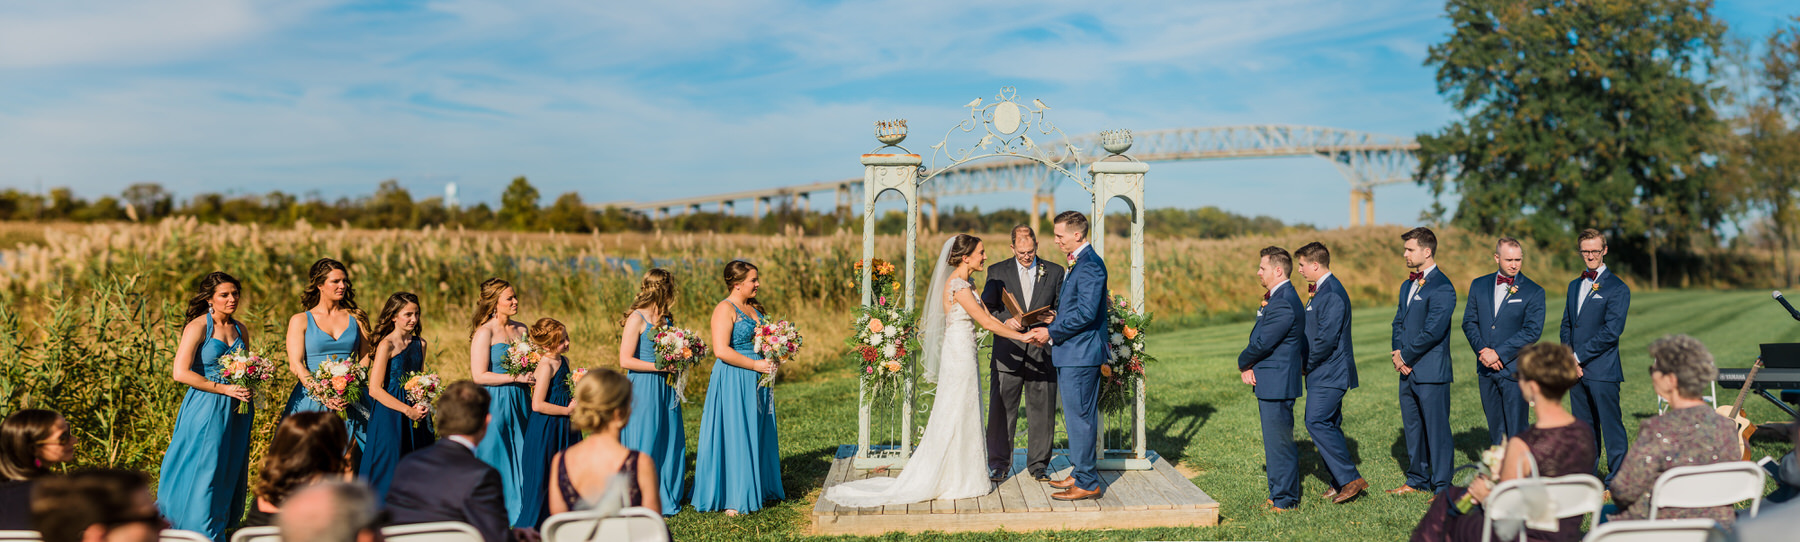 Thousand Acre Farm Wedding Cost Info With Photos Delaware